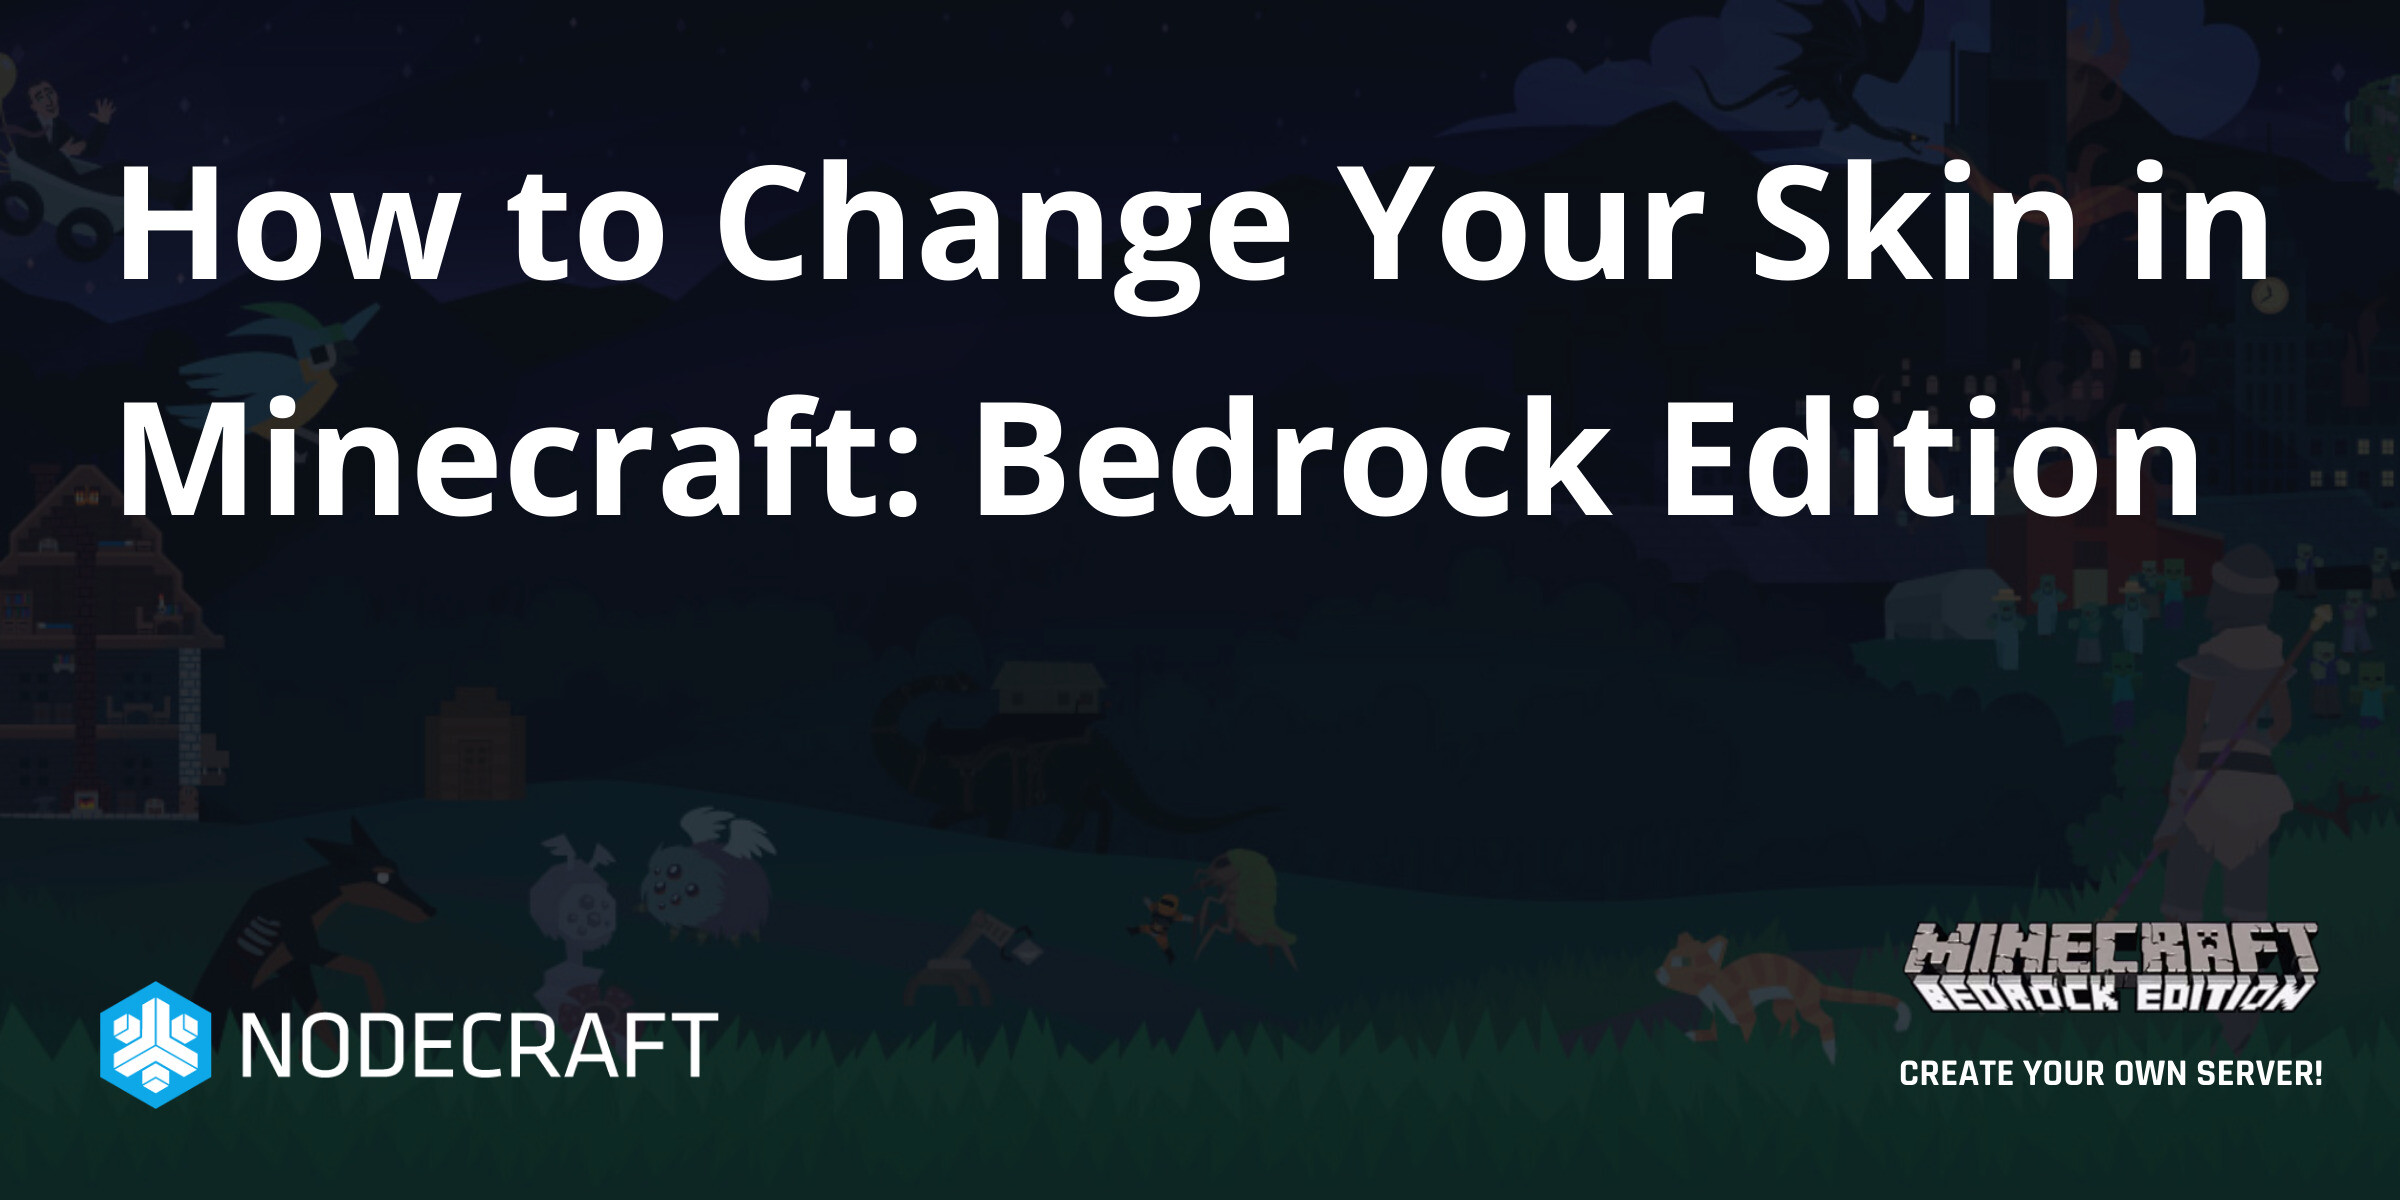 How to Change Your Skin in Minecraft: Bedrock Edition, Minecraft Bedrock